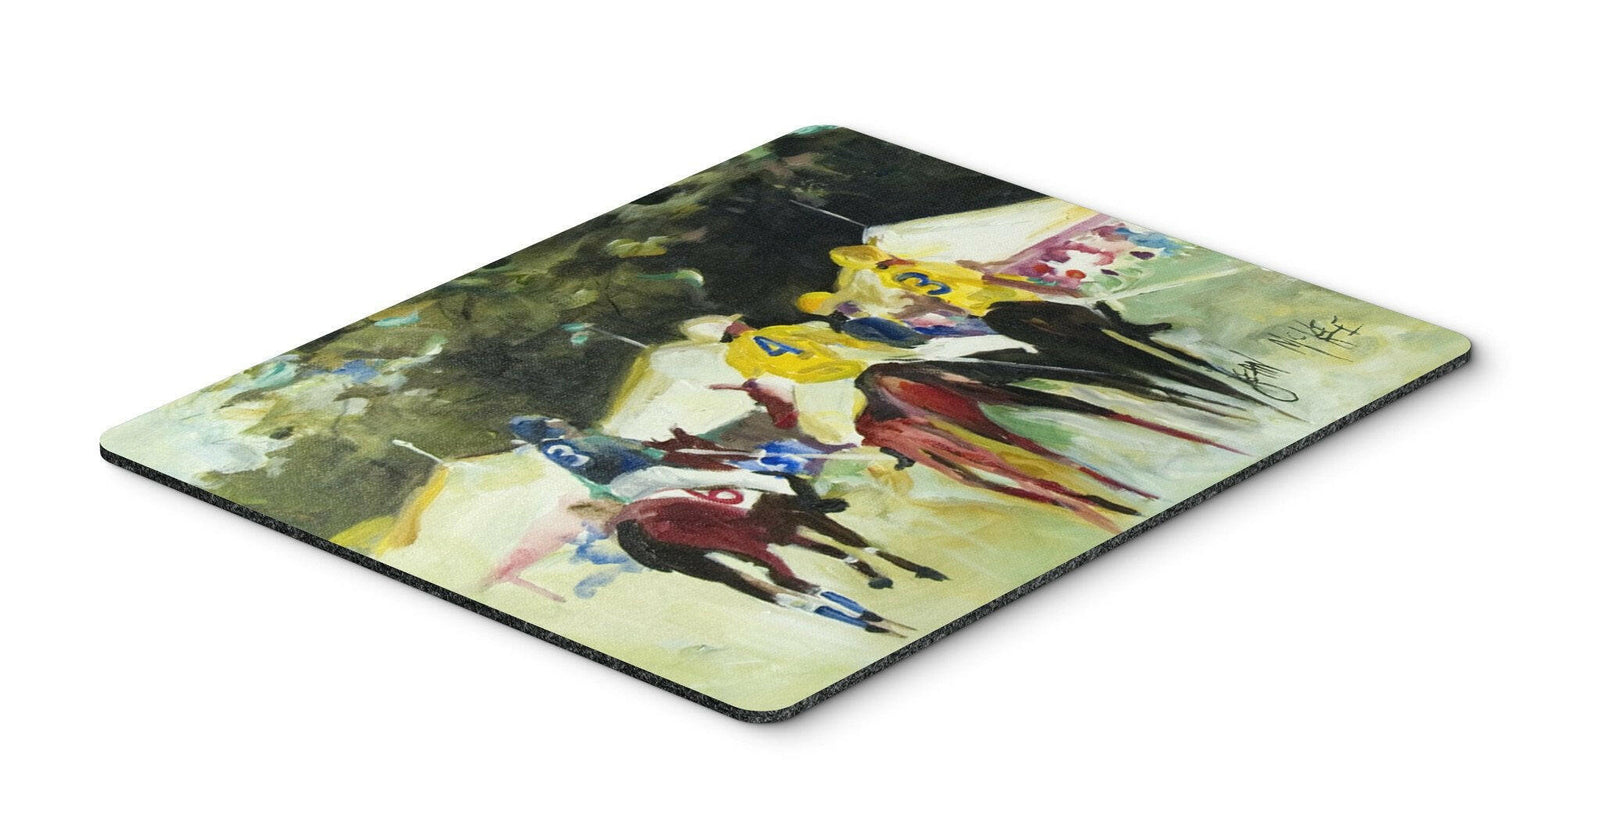 Polo at the Point Mouse Pad, Hot Pad or Trivet JMK1007MP by Caroline's Treasures